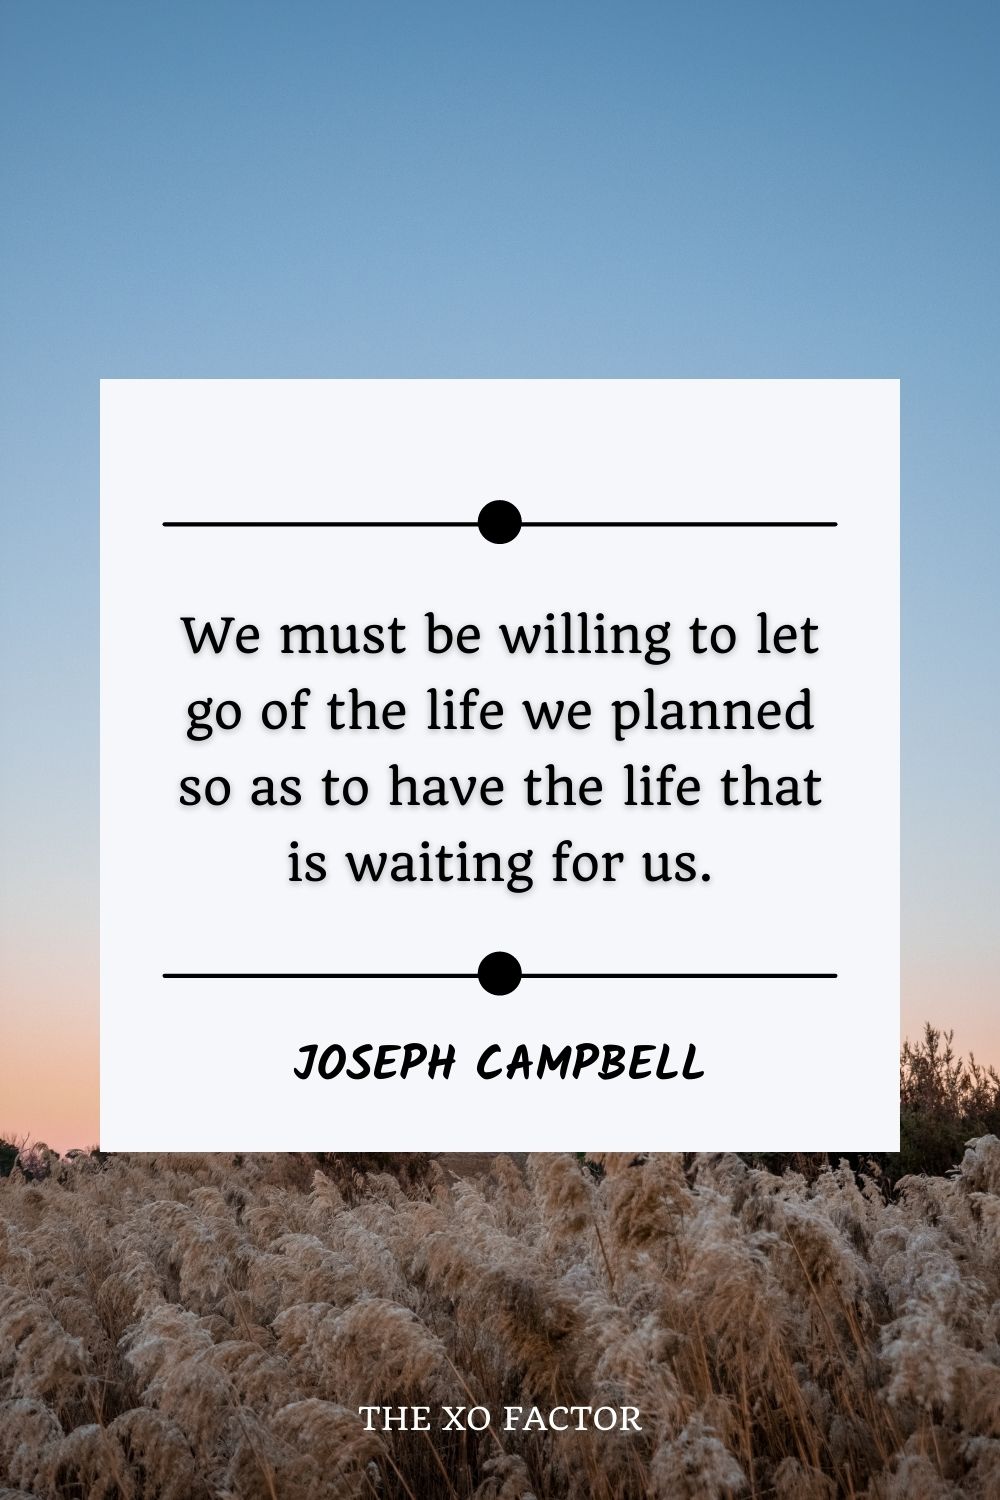 We must be willing to let go of the life we planned so as to have the life that is waiting for us.” – Joseph Campbell